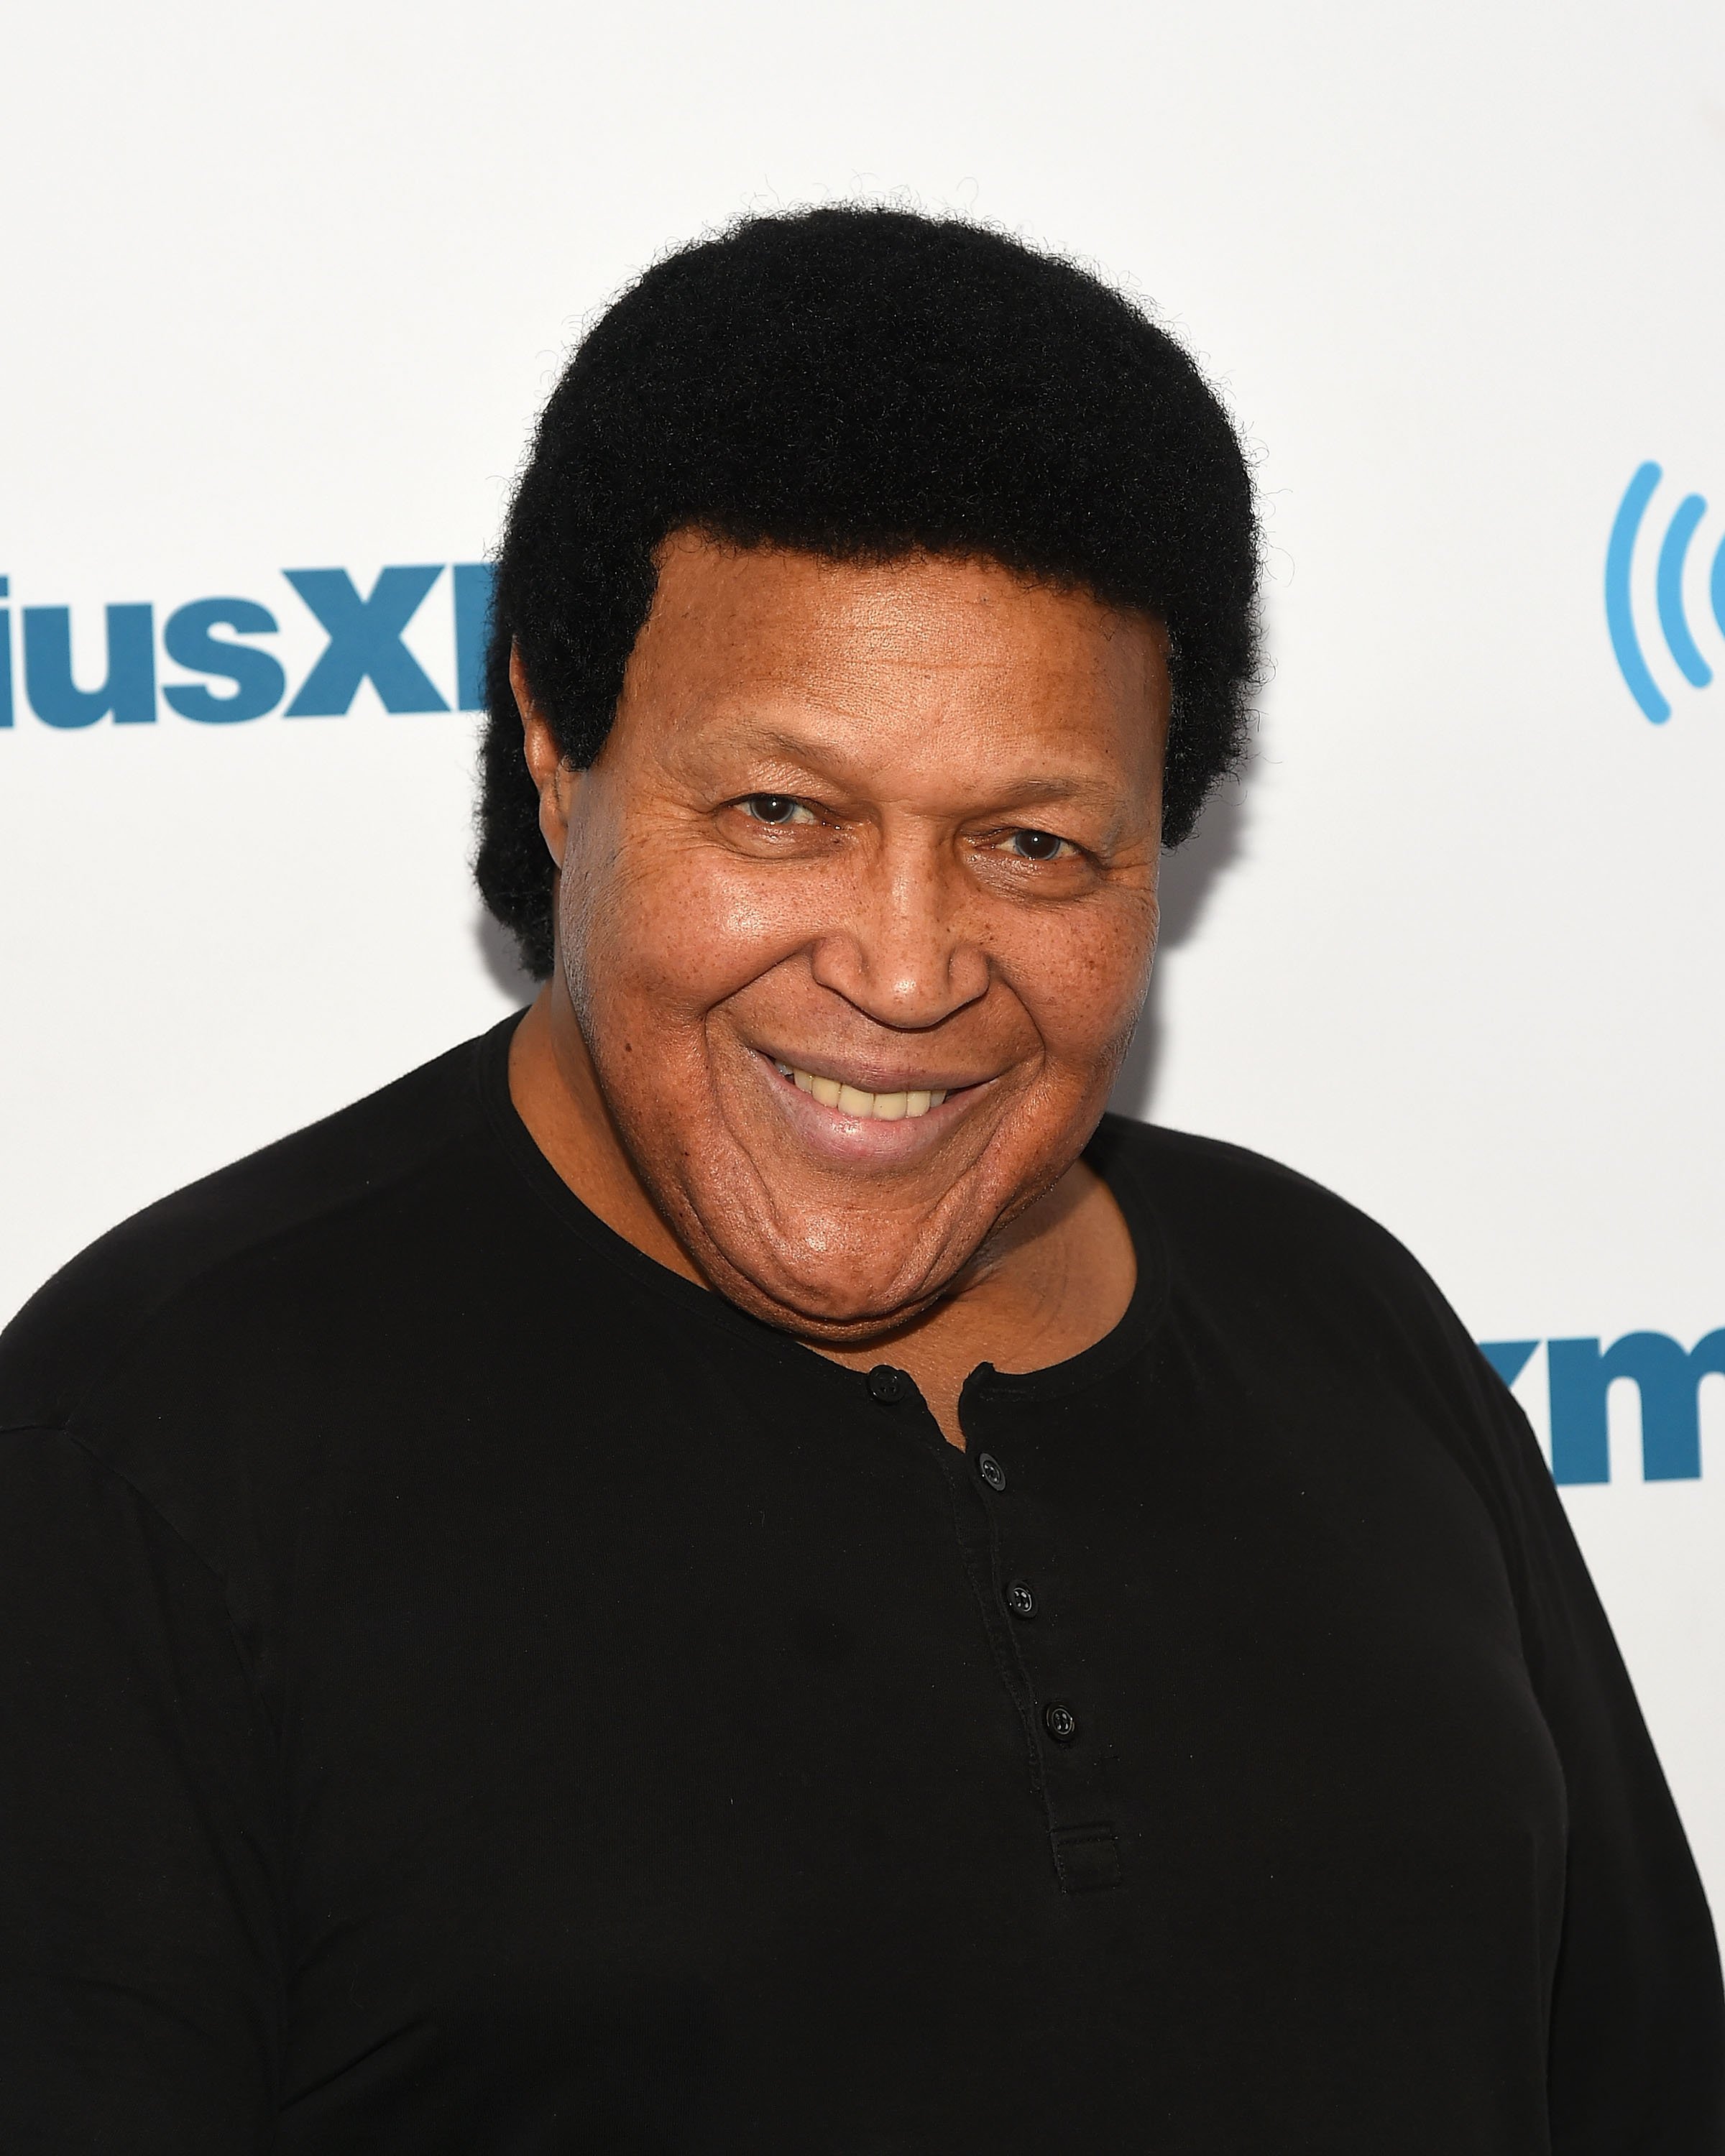 Singer/songwriter Chubby Checker visits at SiriusXM Studios on March 23, 2016, in New York City. | Source: Getty Images.